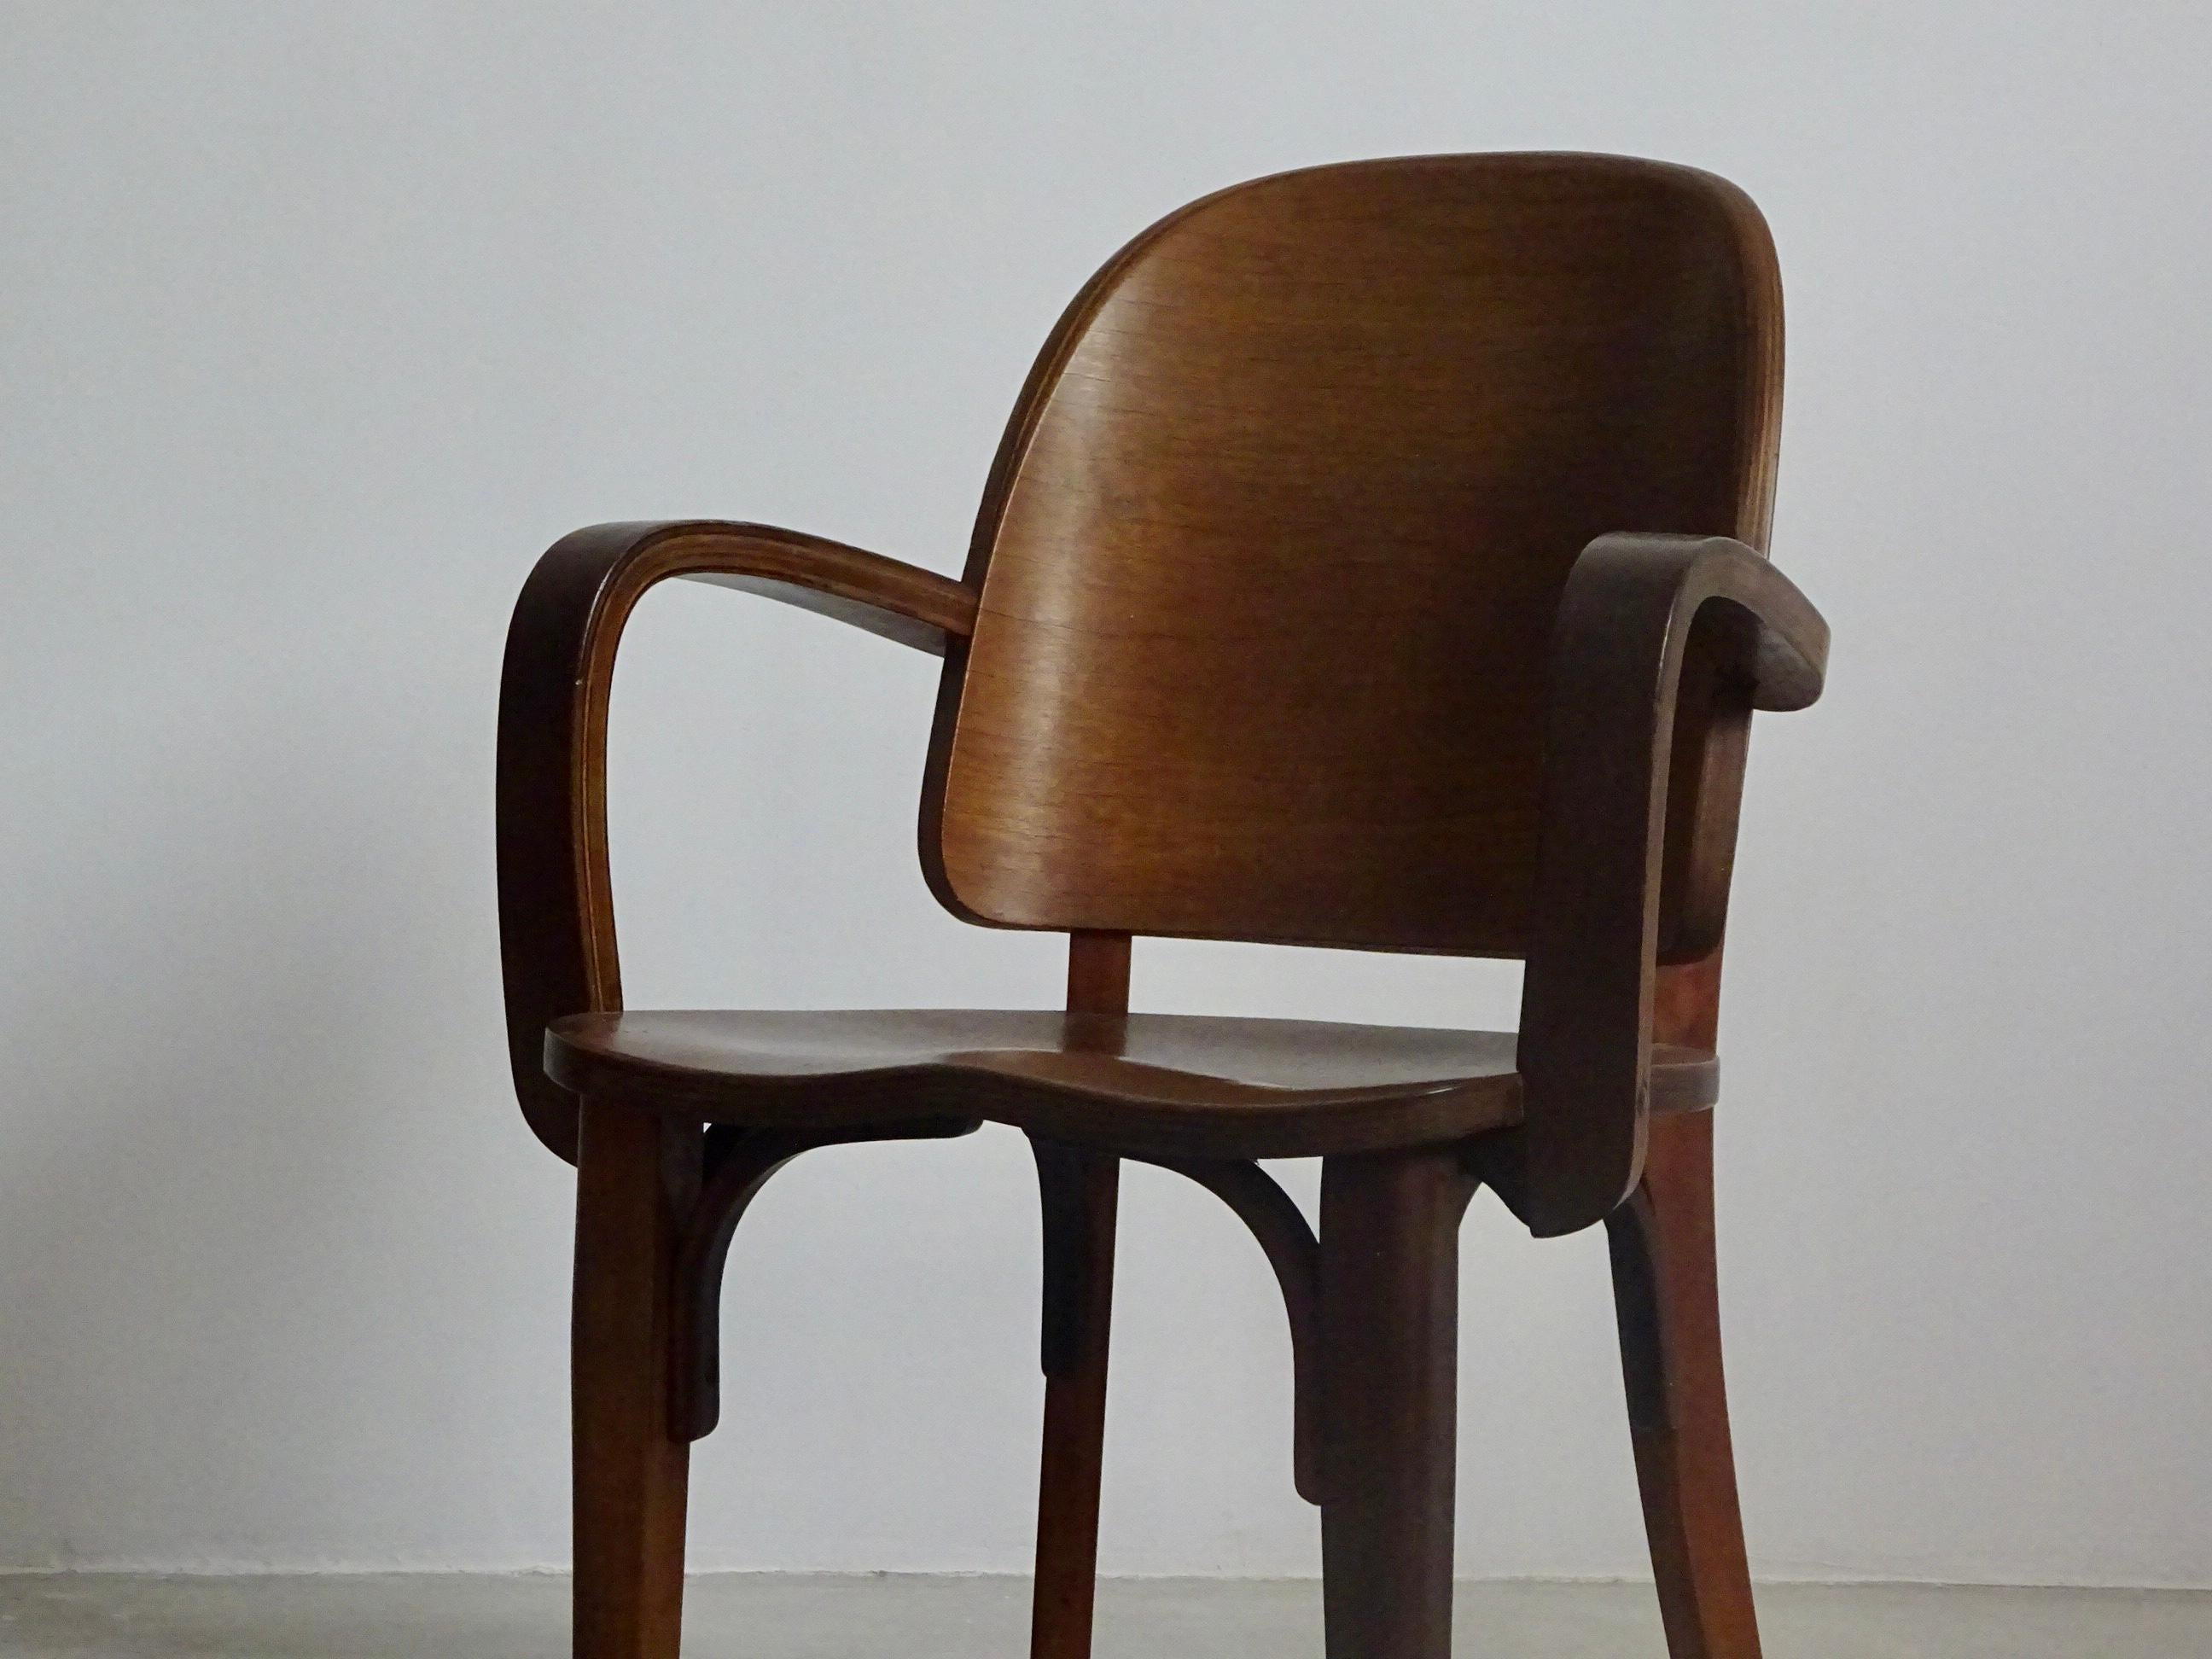 Model “201” armchair designed and produced by “Móveis Cimo” in 1940s, made of plywood and solid “imbuia” wood. Very strong and comfortable chair.